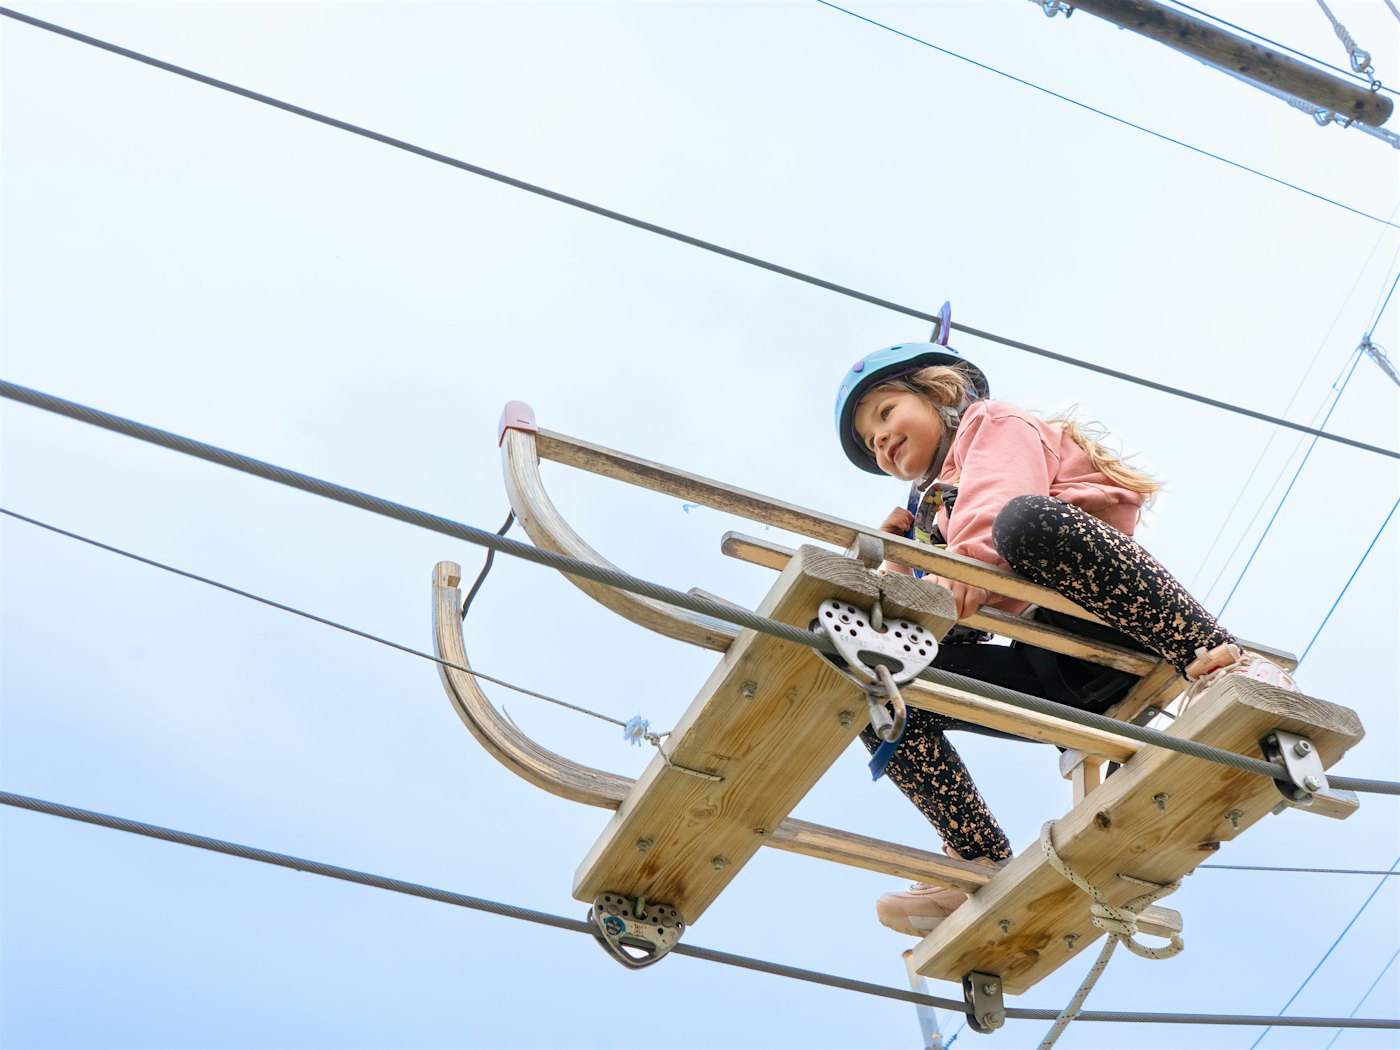 A girl has fun while sitting on a toboggan zipline in the climbing park. Photo